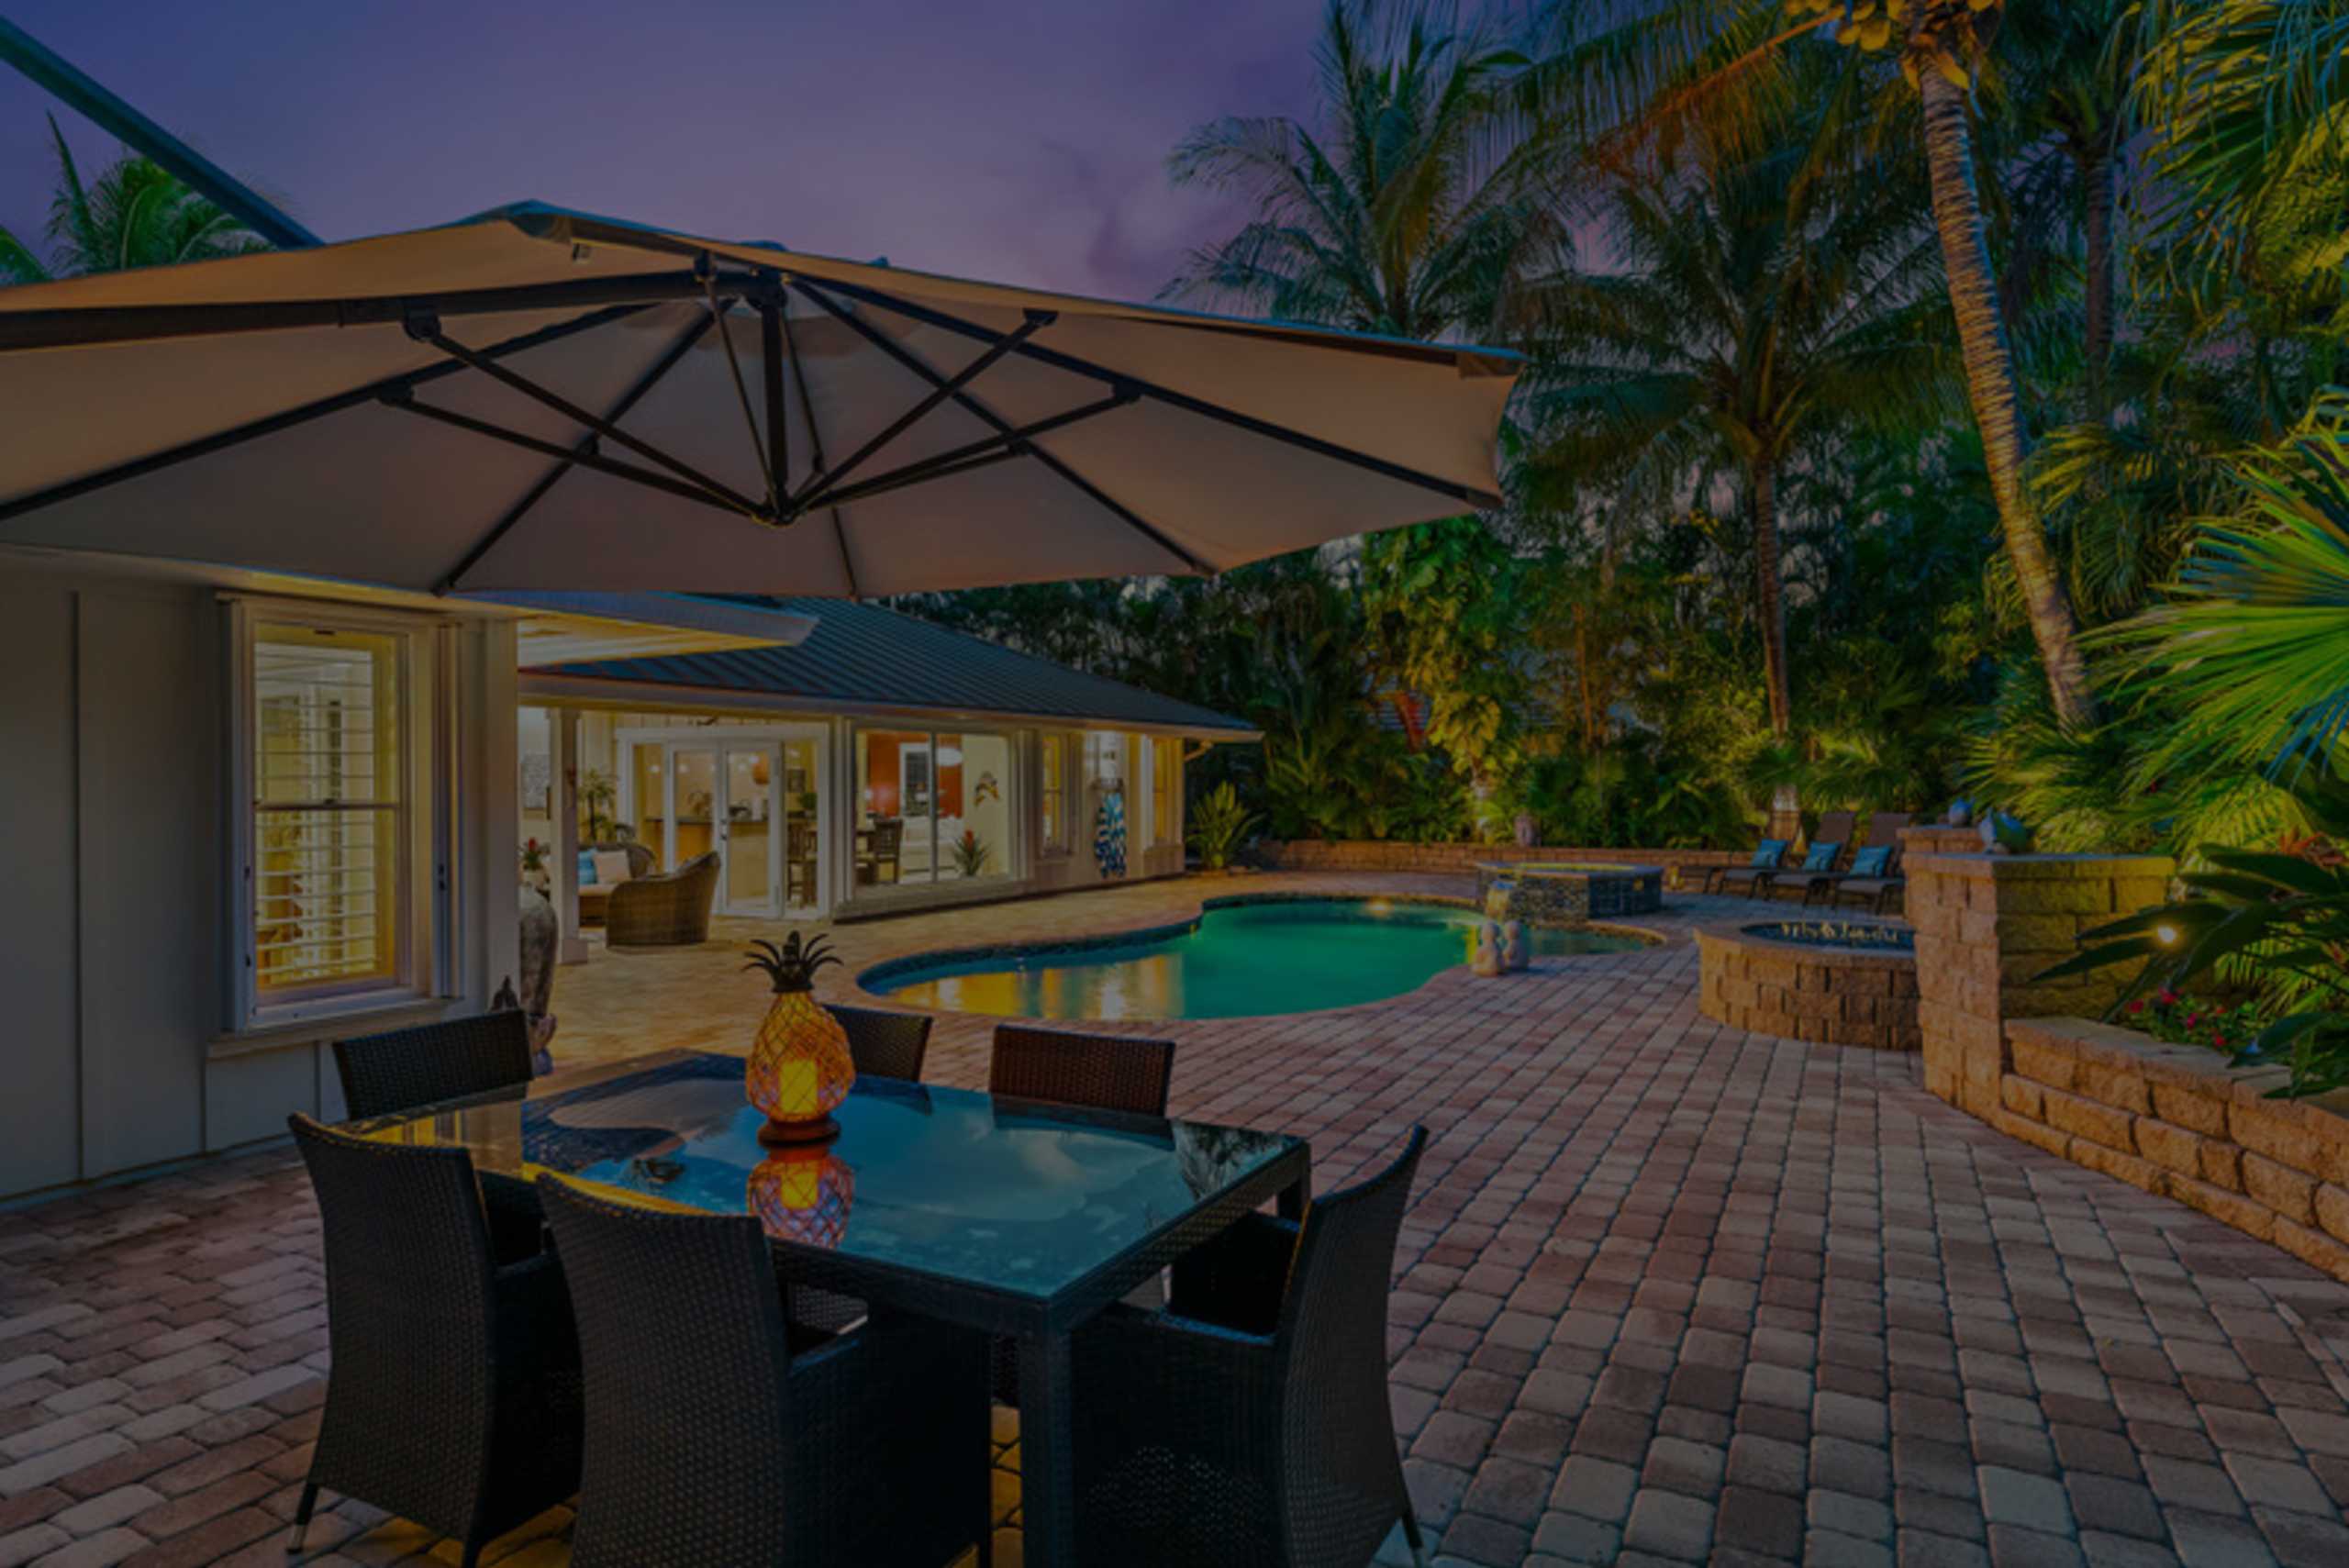 FABULOUS BEACH HOUSE CLOSE TO ALL JUPITER HAS TO OFFER! $2,250,000